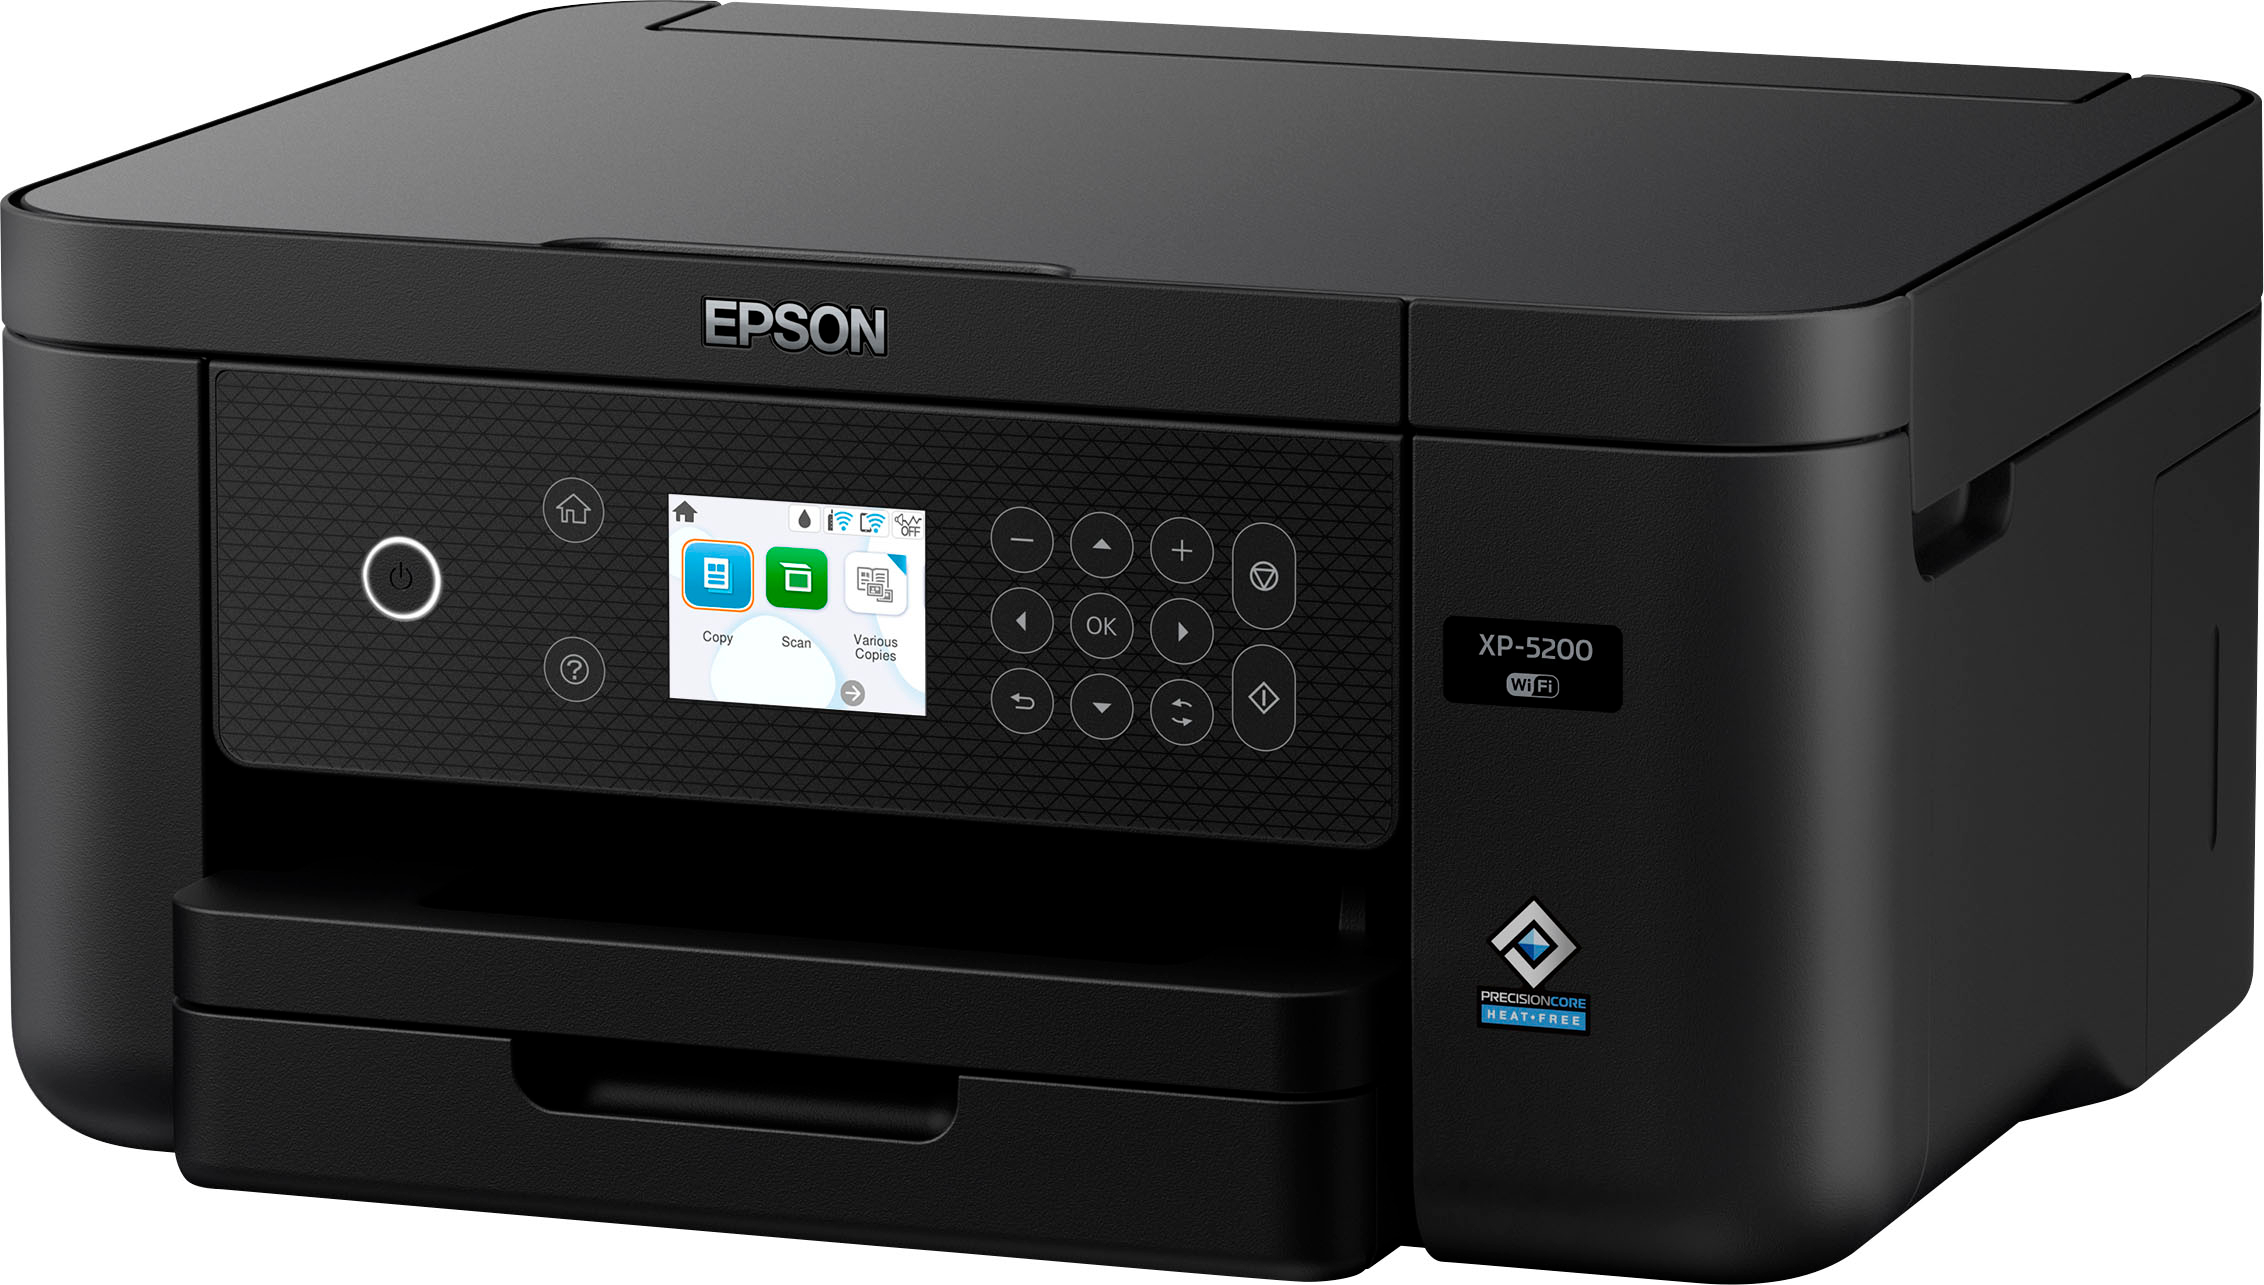 Epson XP-5200 All-in-One - Printer Expression C11CK61201 Black Buy Home Inkjet Best